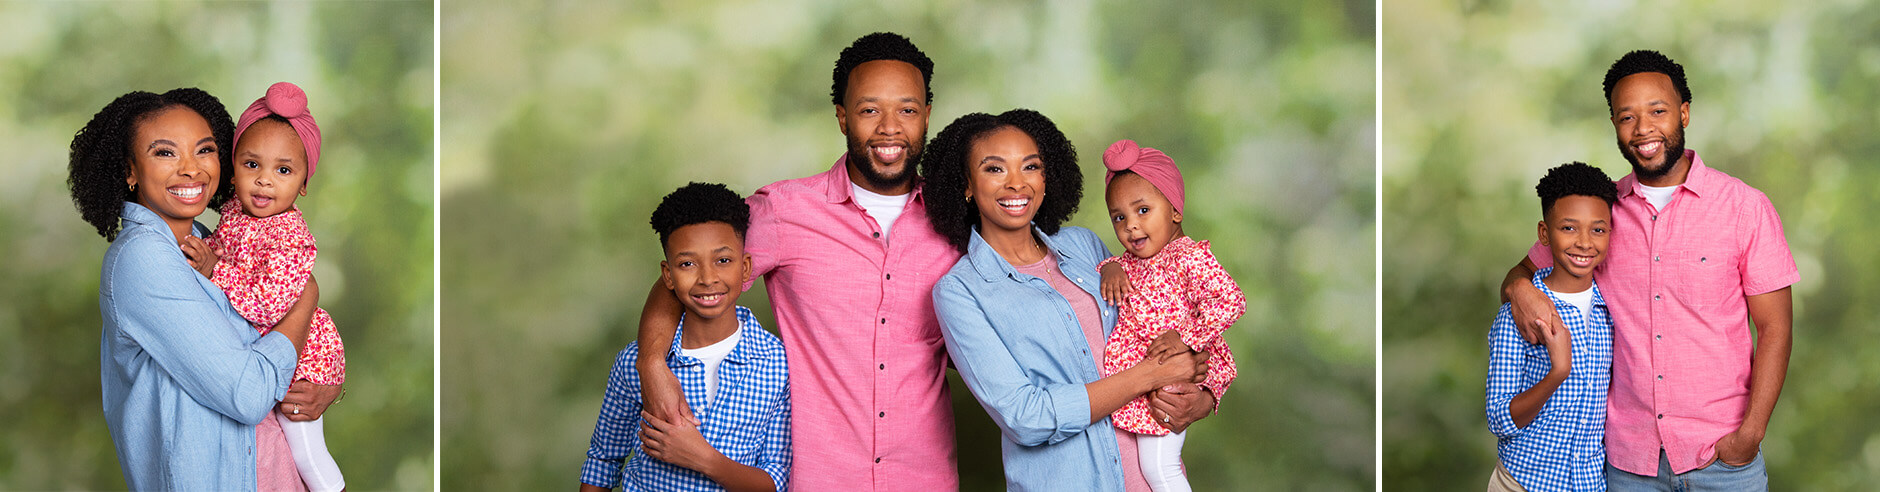 Are Professional Family Photos Worth It? Yes, and Here’s Why